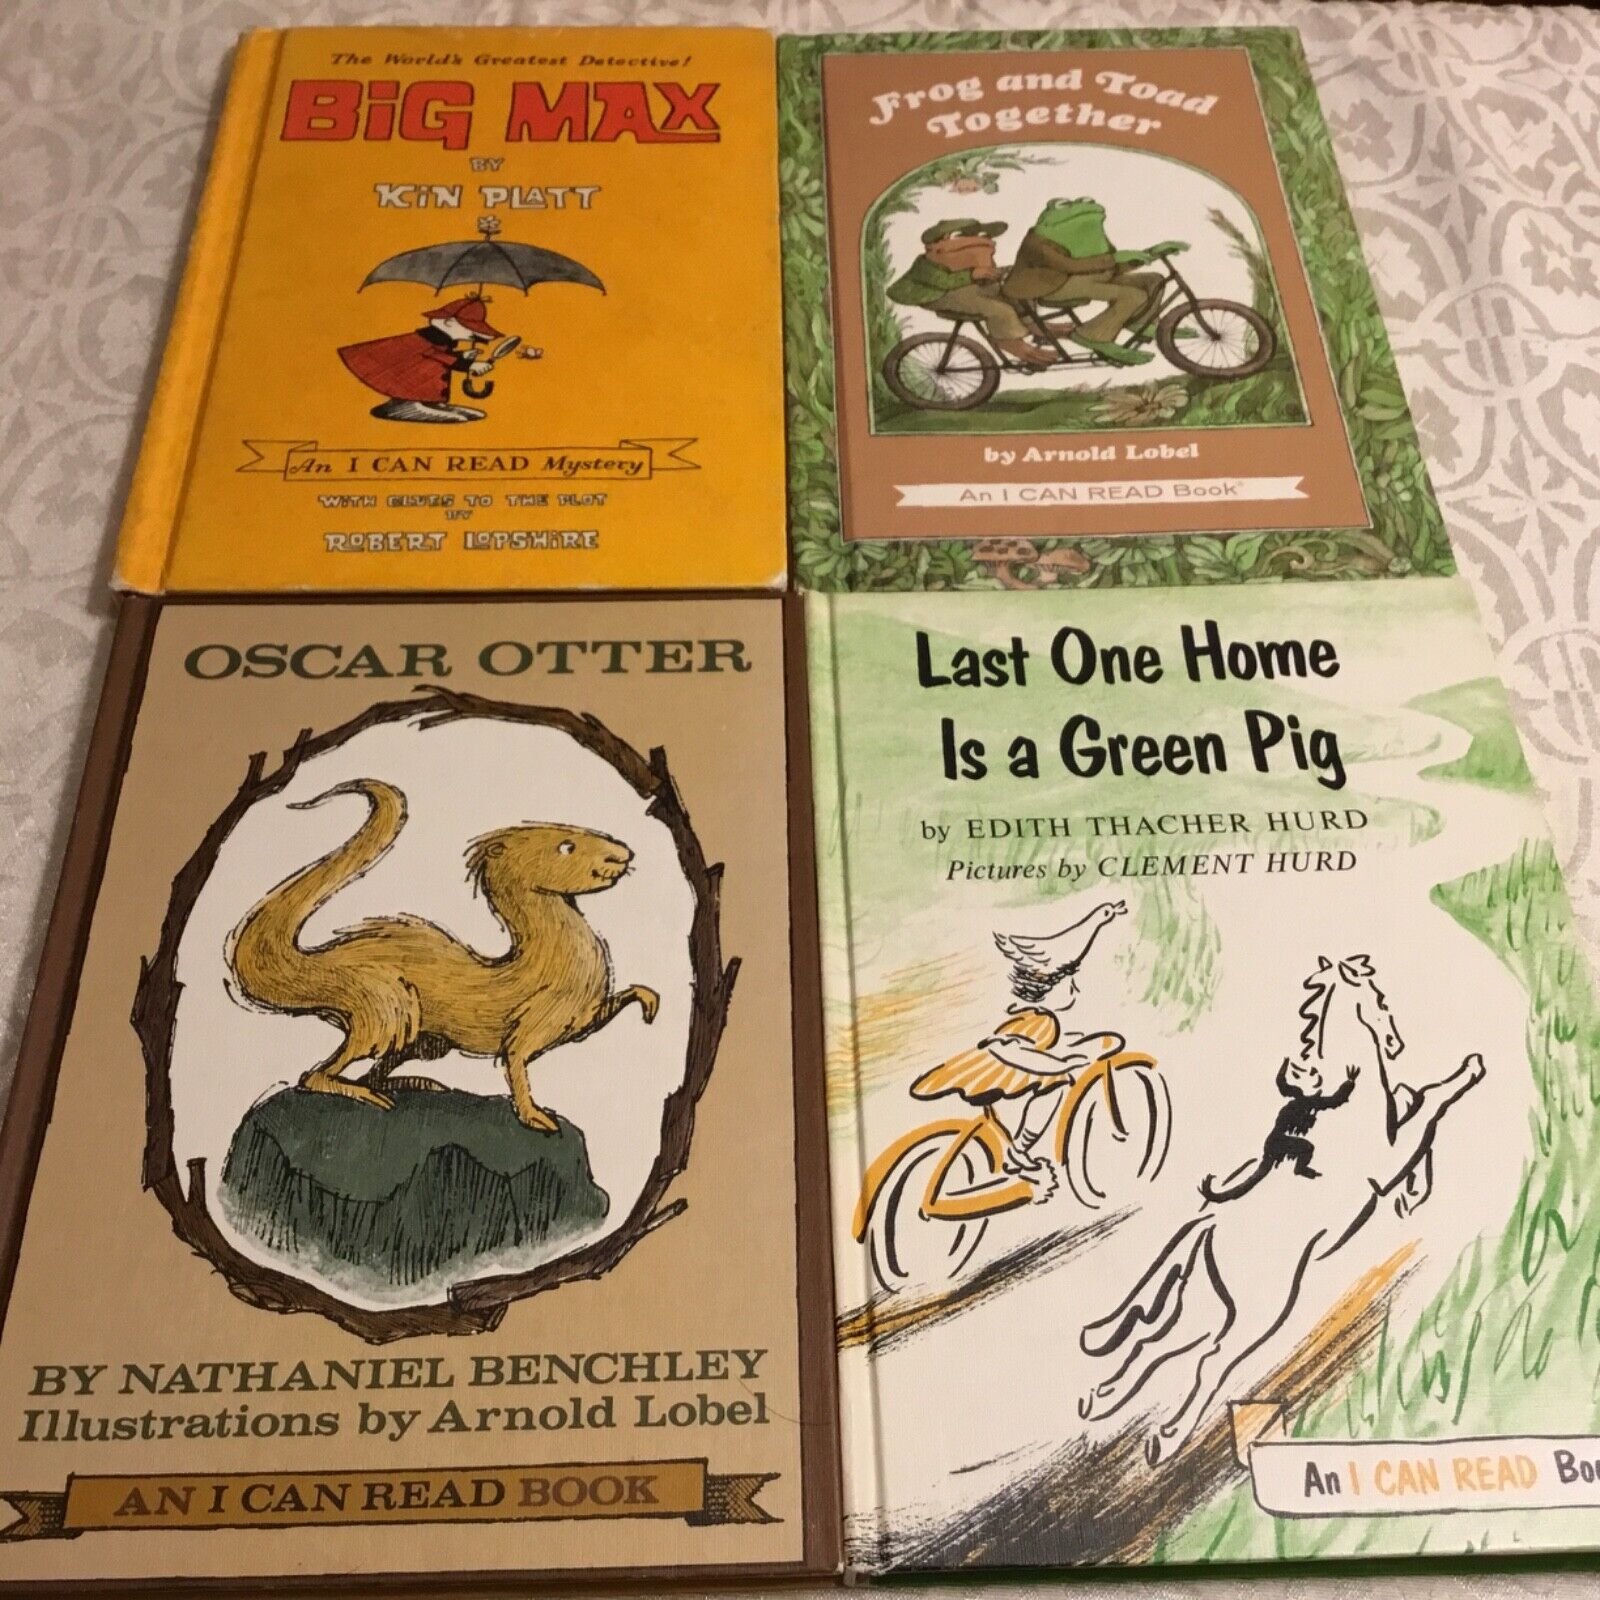 VINTAGE ASSORTED LOT OF 4 “AN I CAN READ BOOK” HARDCOVER BOOKS 1959-1972